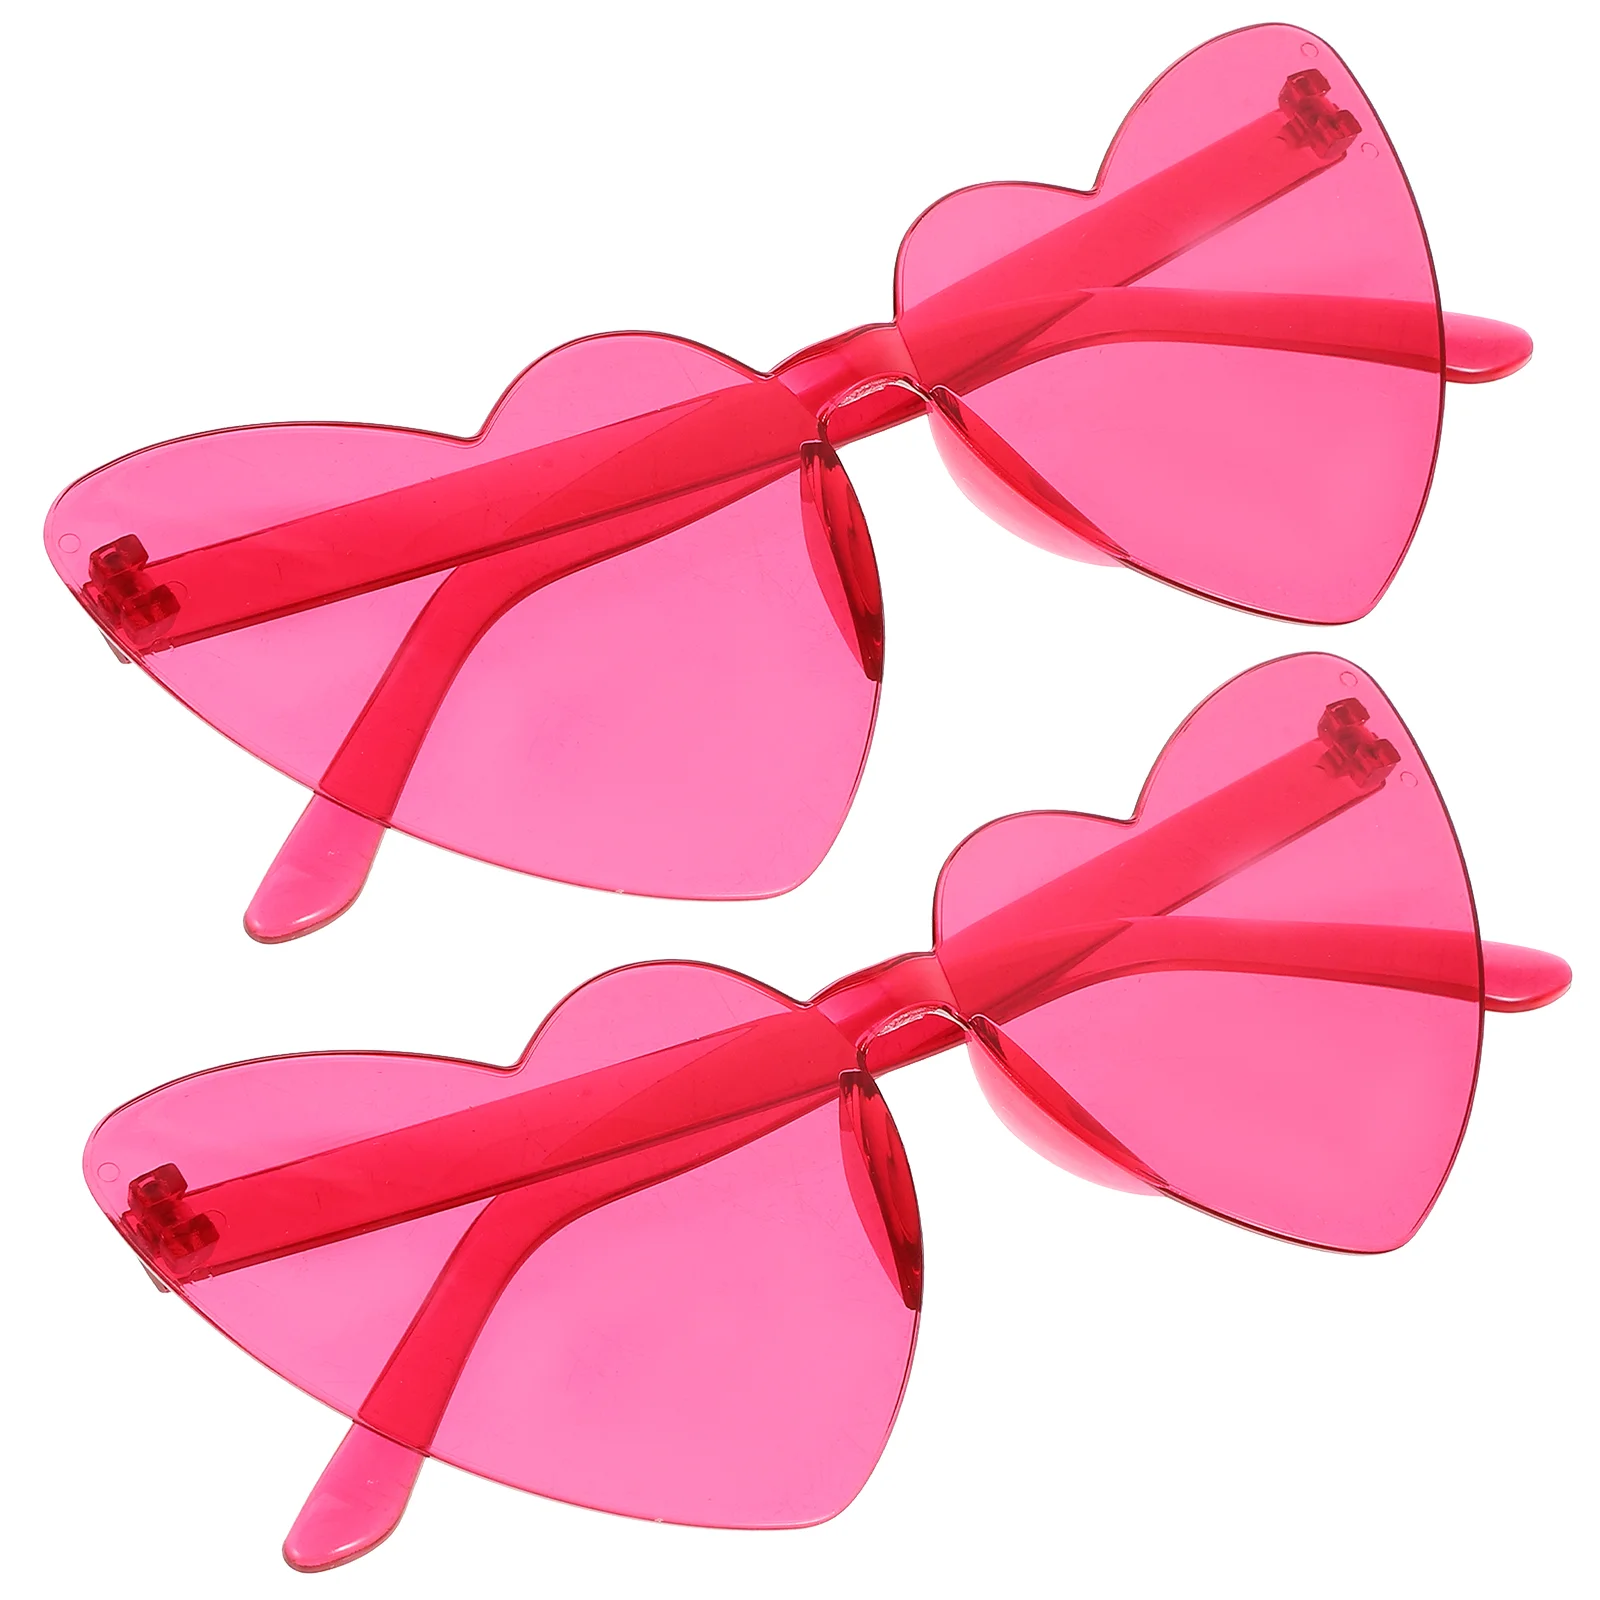 

2 Pcs Heart Sunglasses Rimless Shape Cool Jelly Color For Women Decorative Frameless Miss Fun Photo Props